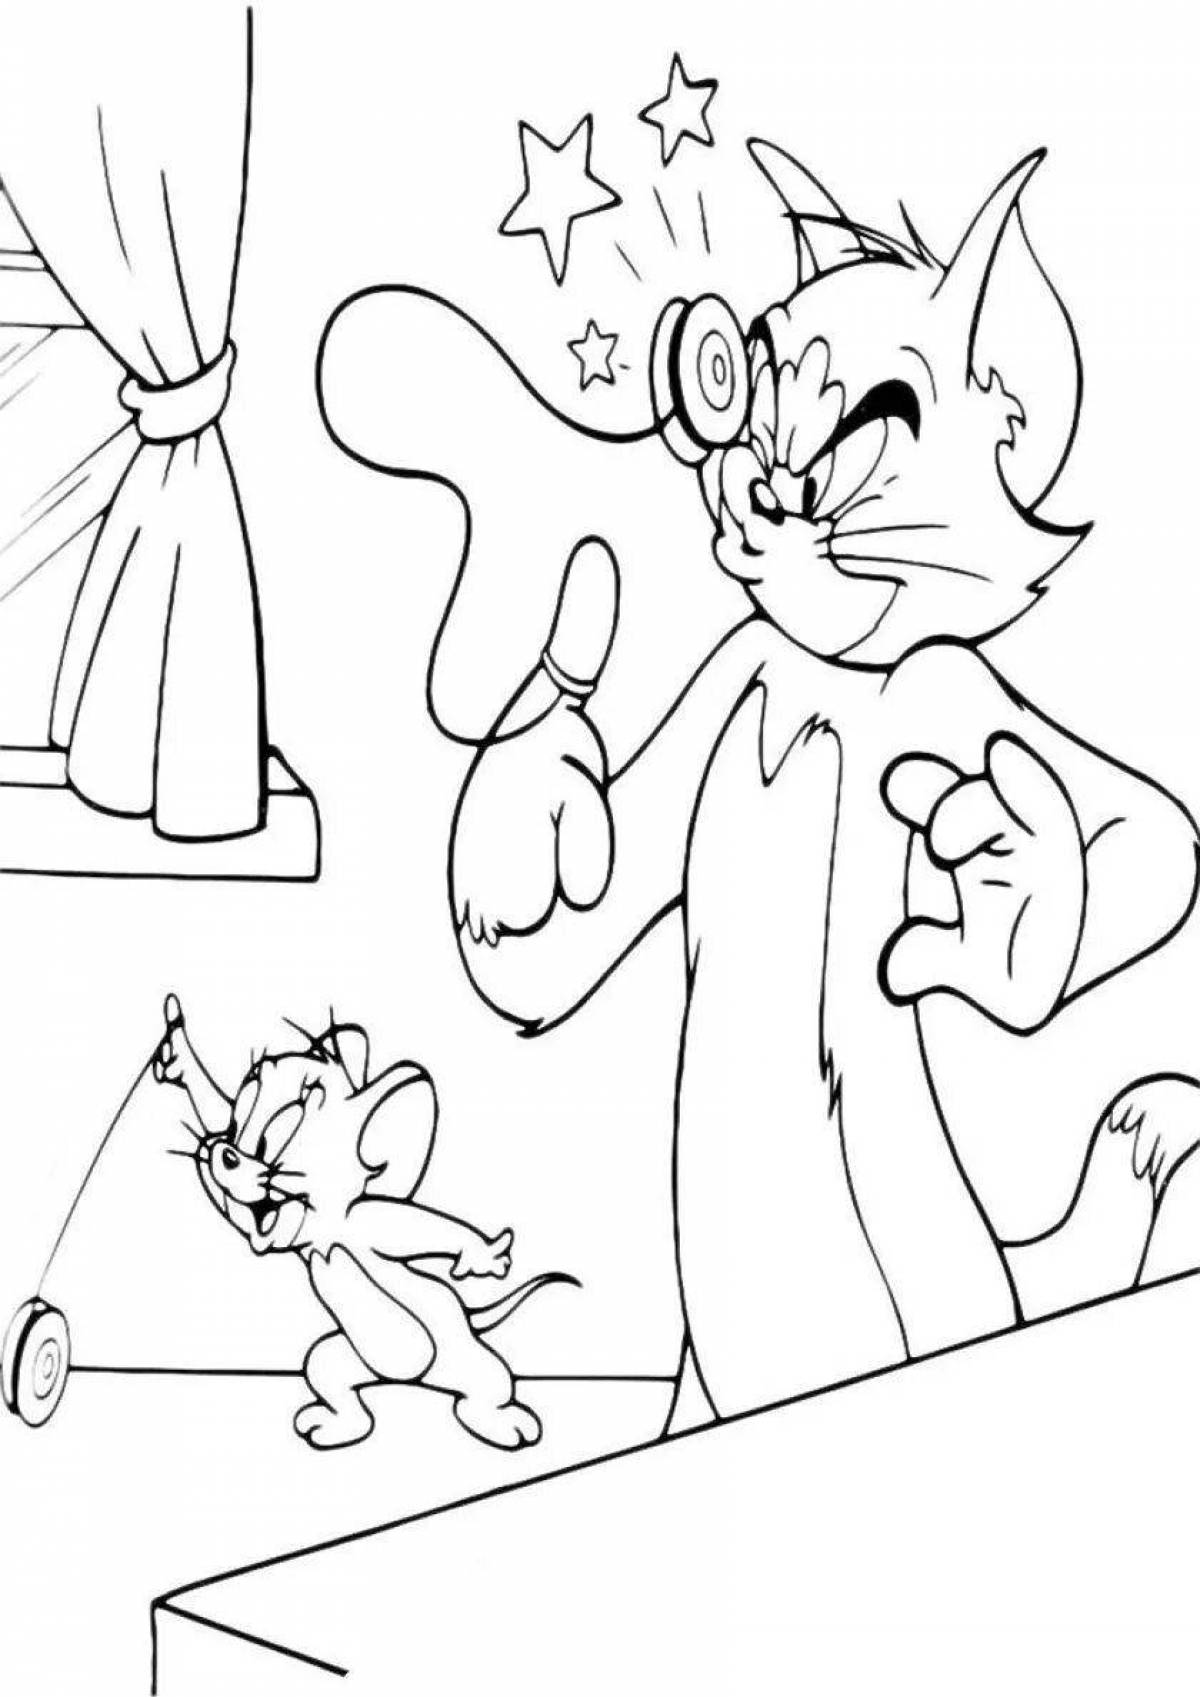 Colorful tom and jerry coloring game